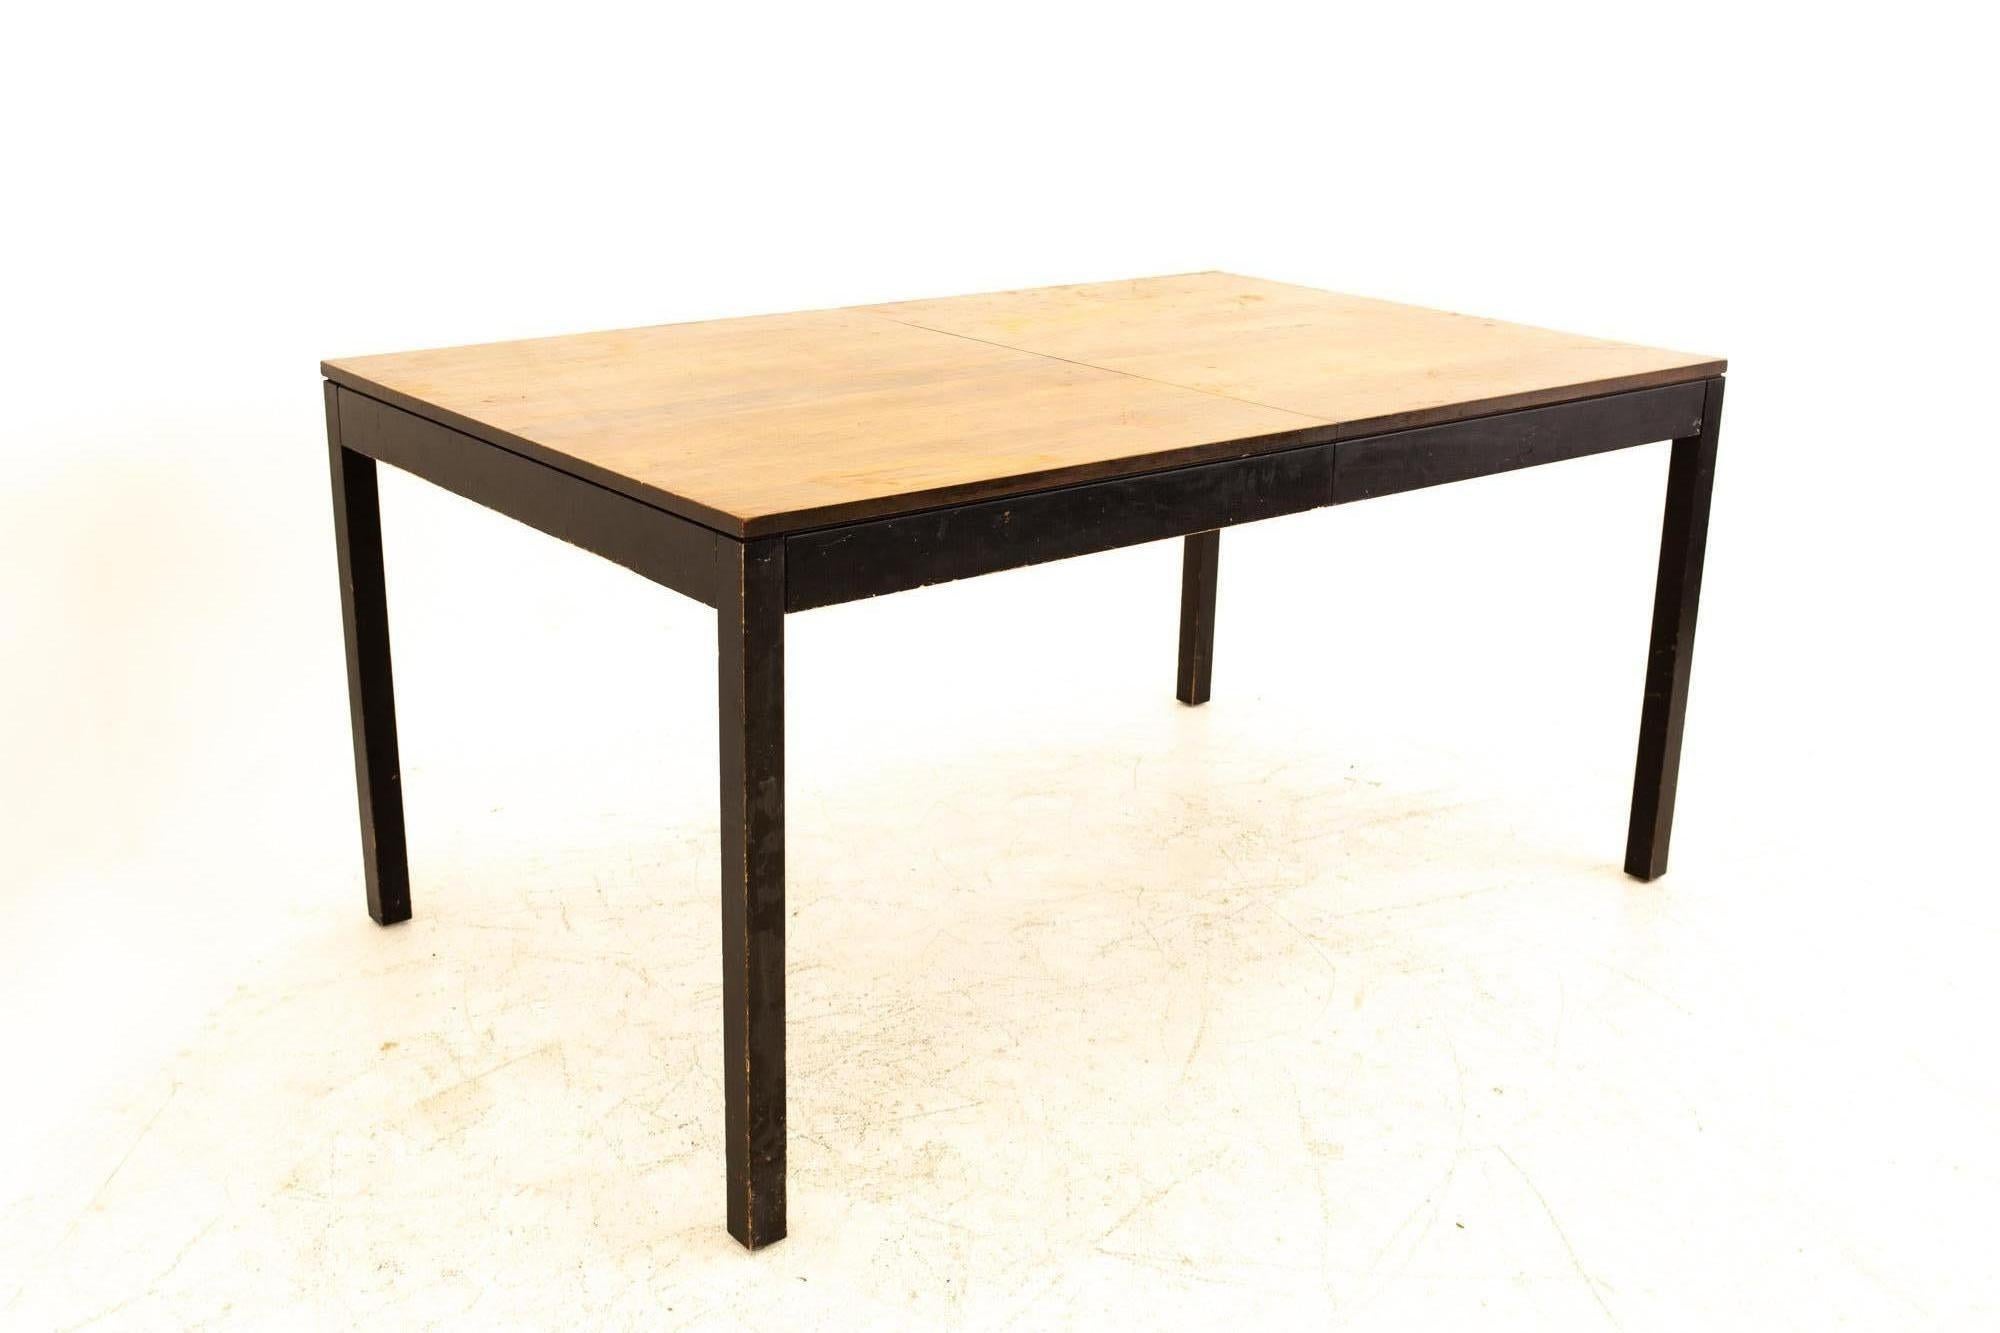 Milo Baughman for Directional parsons midcentury multi wood dining table with 2 leaves

Table with no leaves: 60 wide x 38 deep x 29.5 high, table with one leaf is 80 wide,
Table with two leaves is 100 wide

All pieces of furniture can be had in